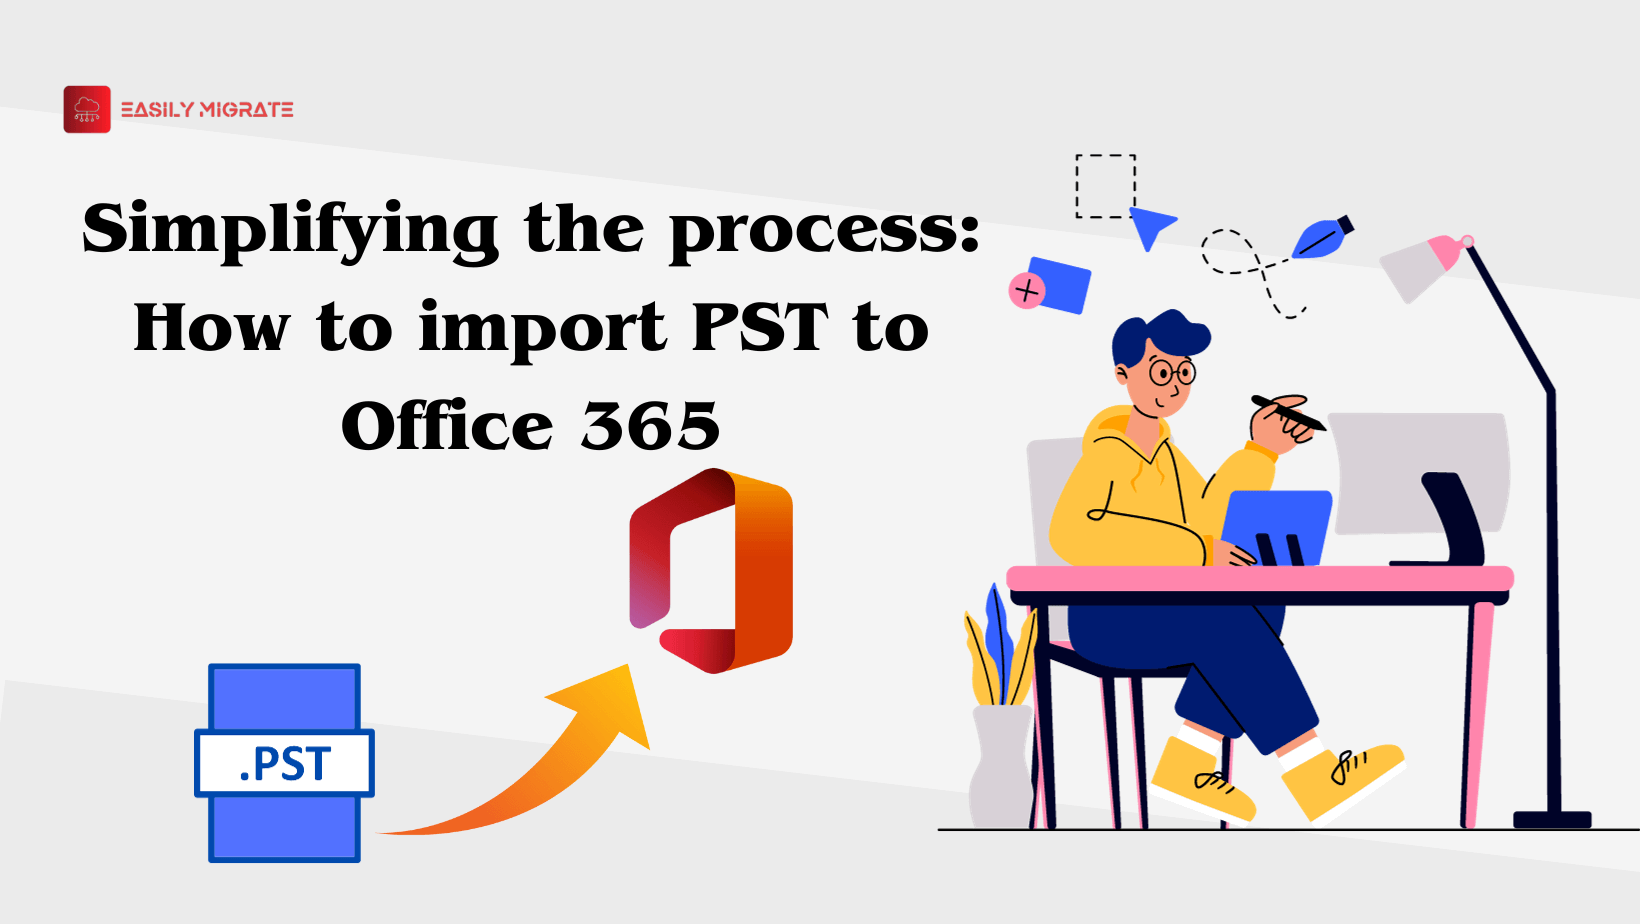 Simplifying the process: How to import PST to Office 365